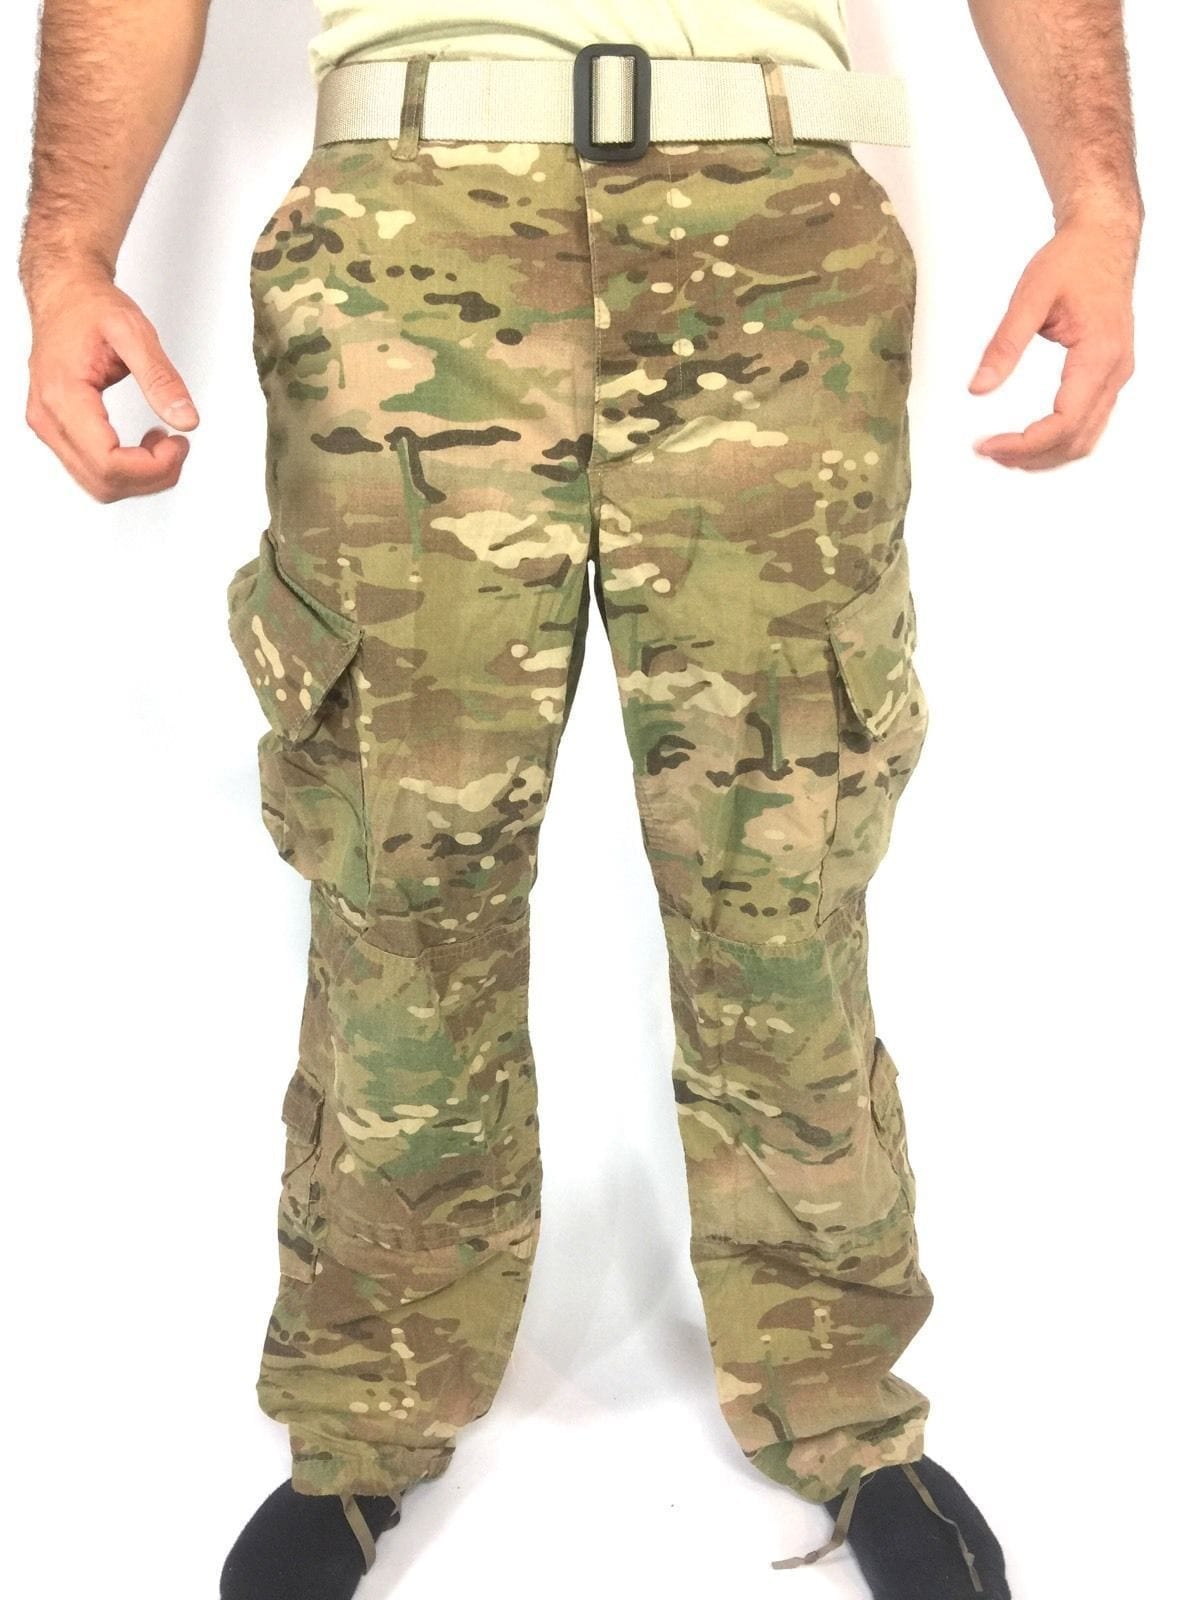 US Army Combat Trousers Pants Multicam OCP Size Medium Regular Insect Shield